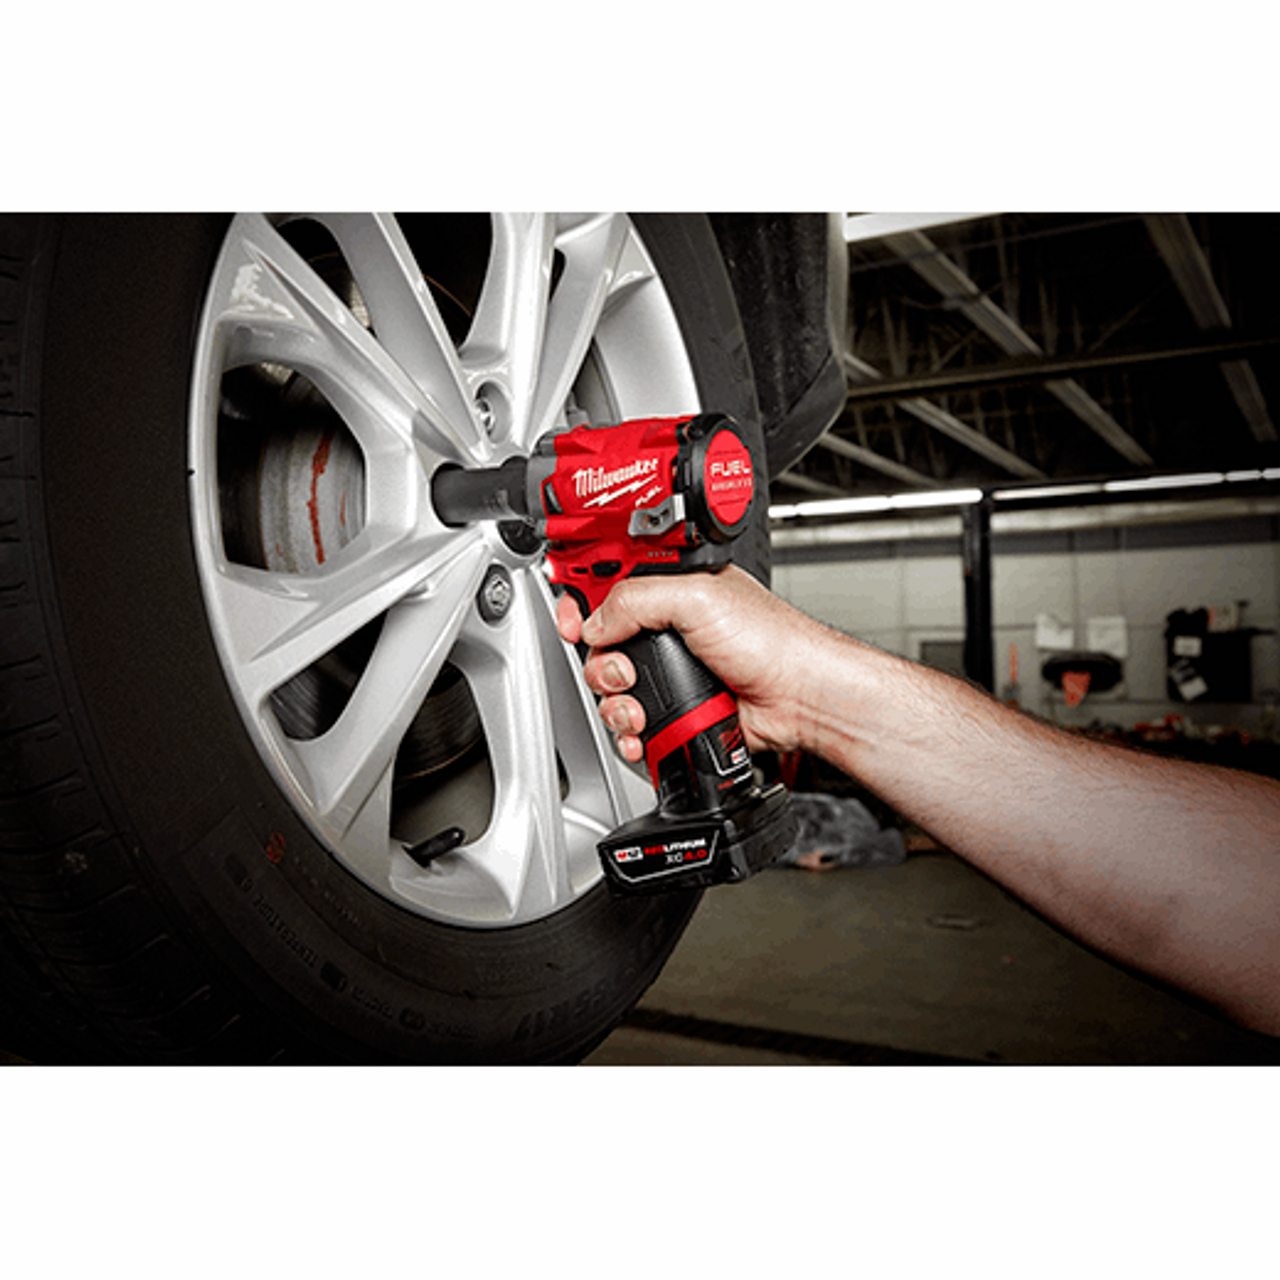 M12 FUEL™ Stubby 1/2" Impact Wrench Kit / free XC5.0 Battery m12